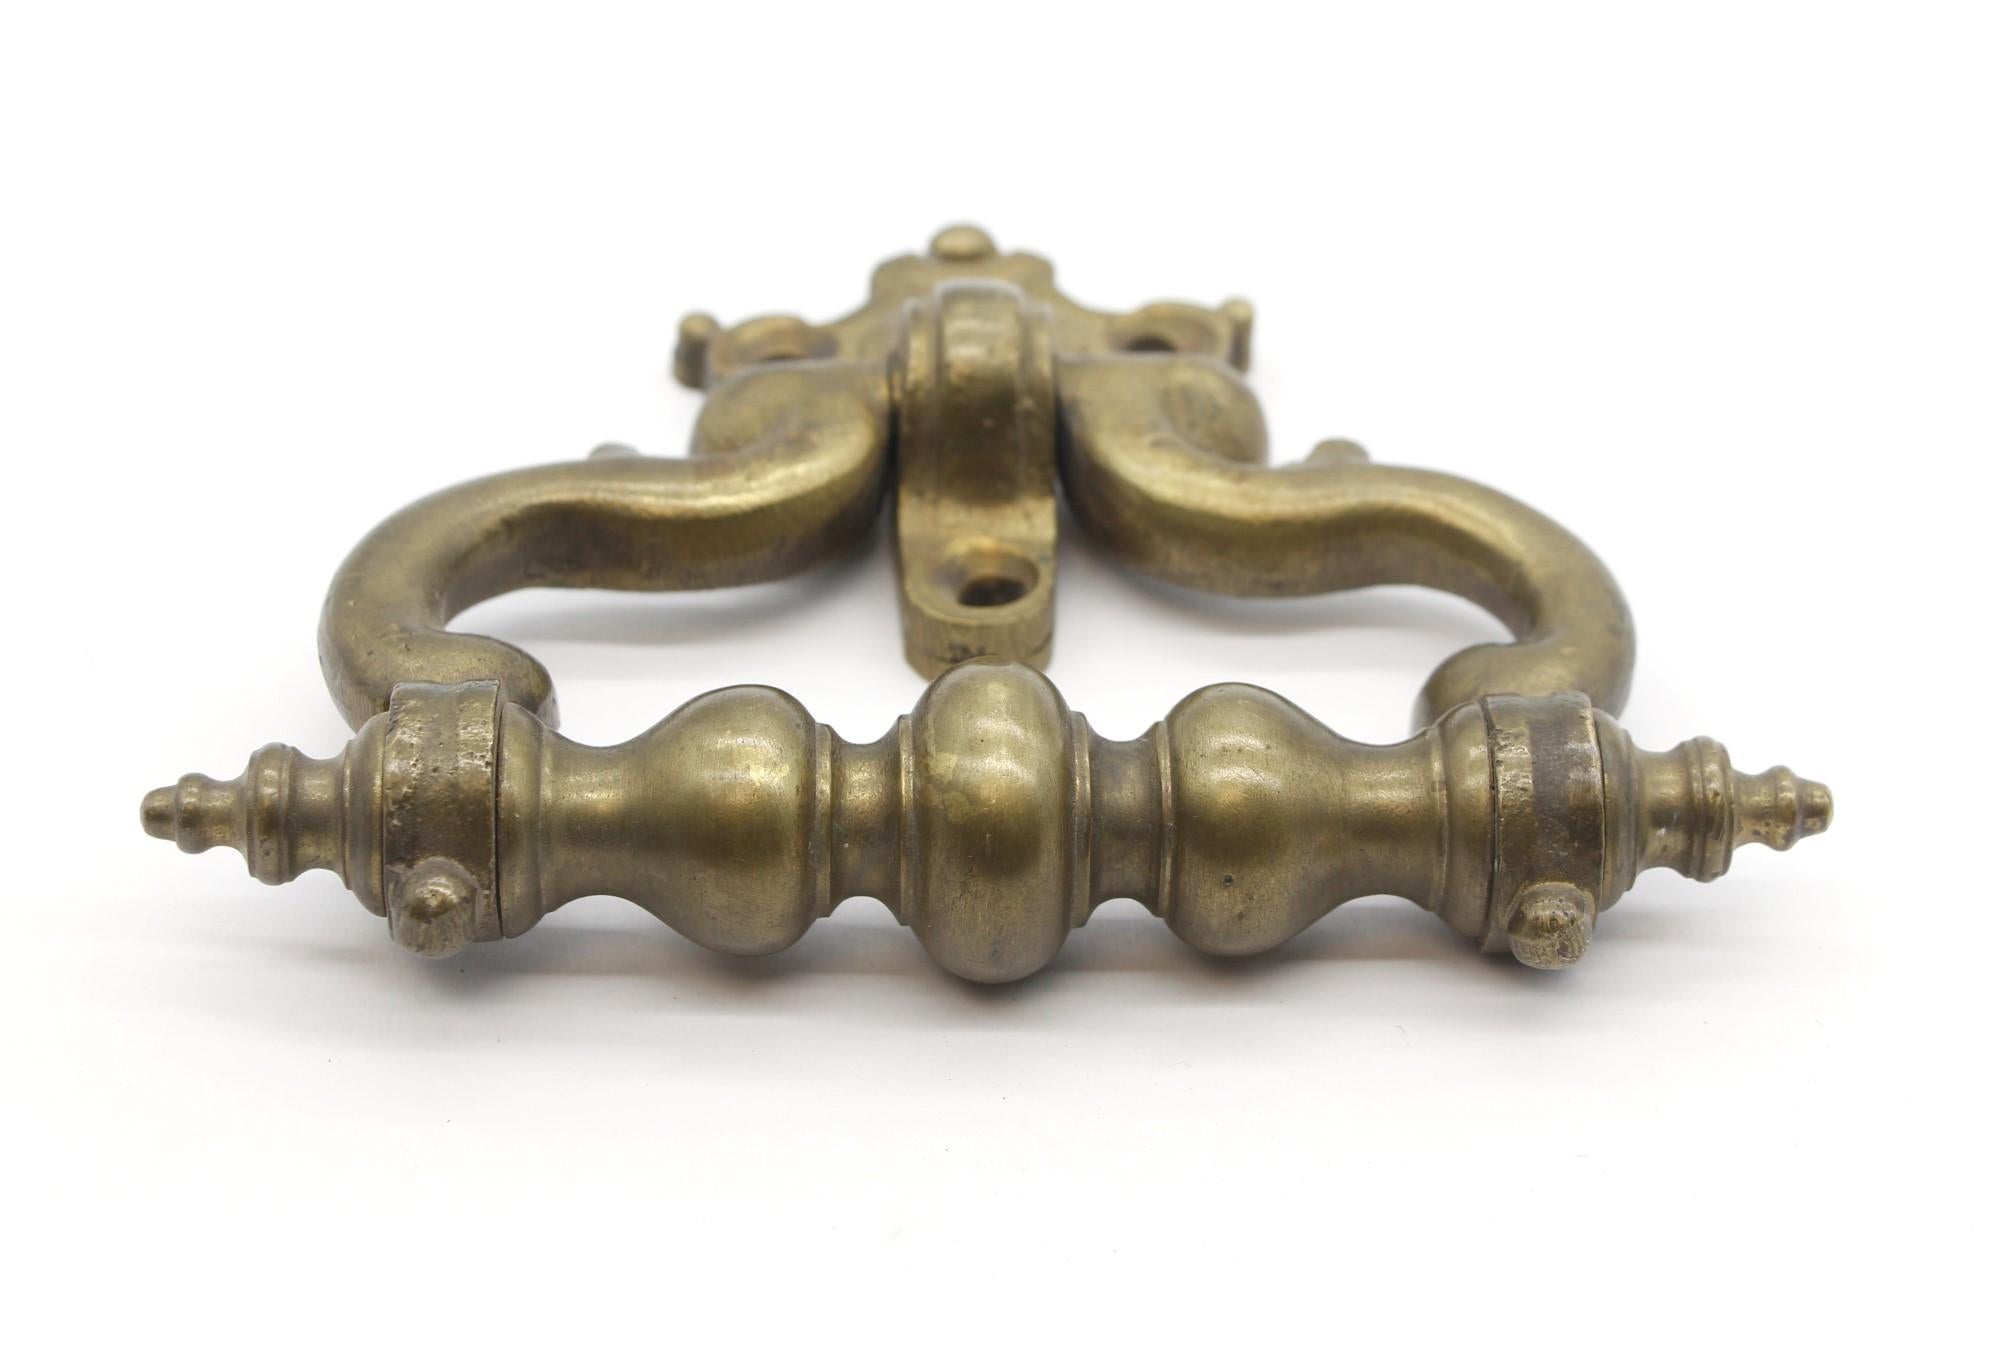 Beefy and solid brass door knocker or handle. Takes three mounting screws. (Not supplied.)